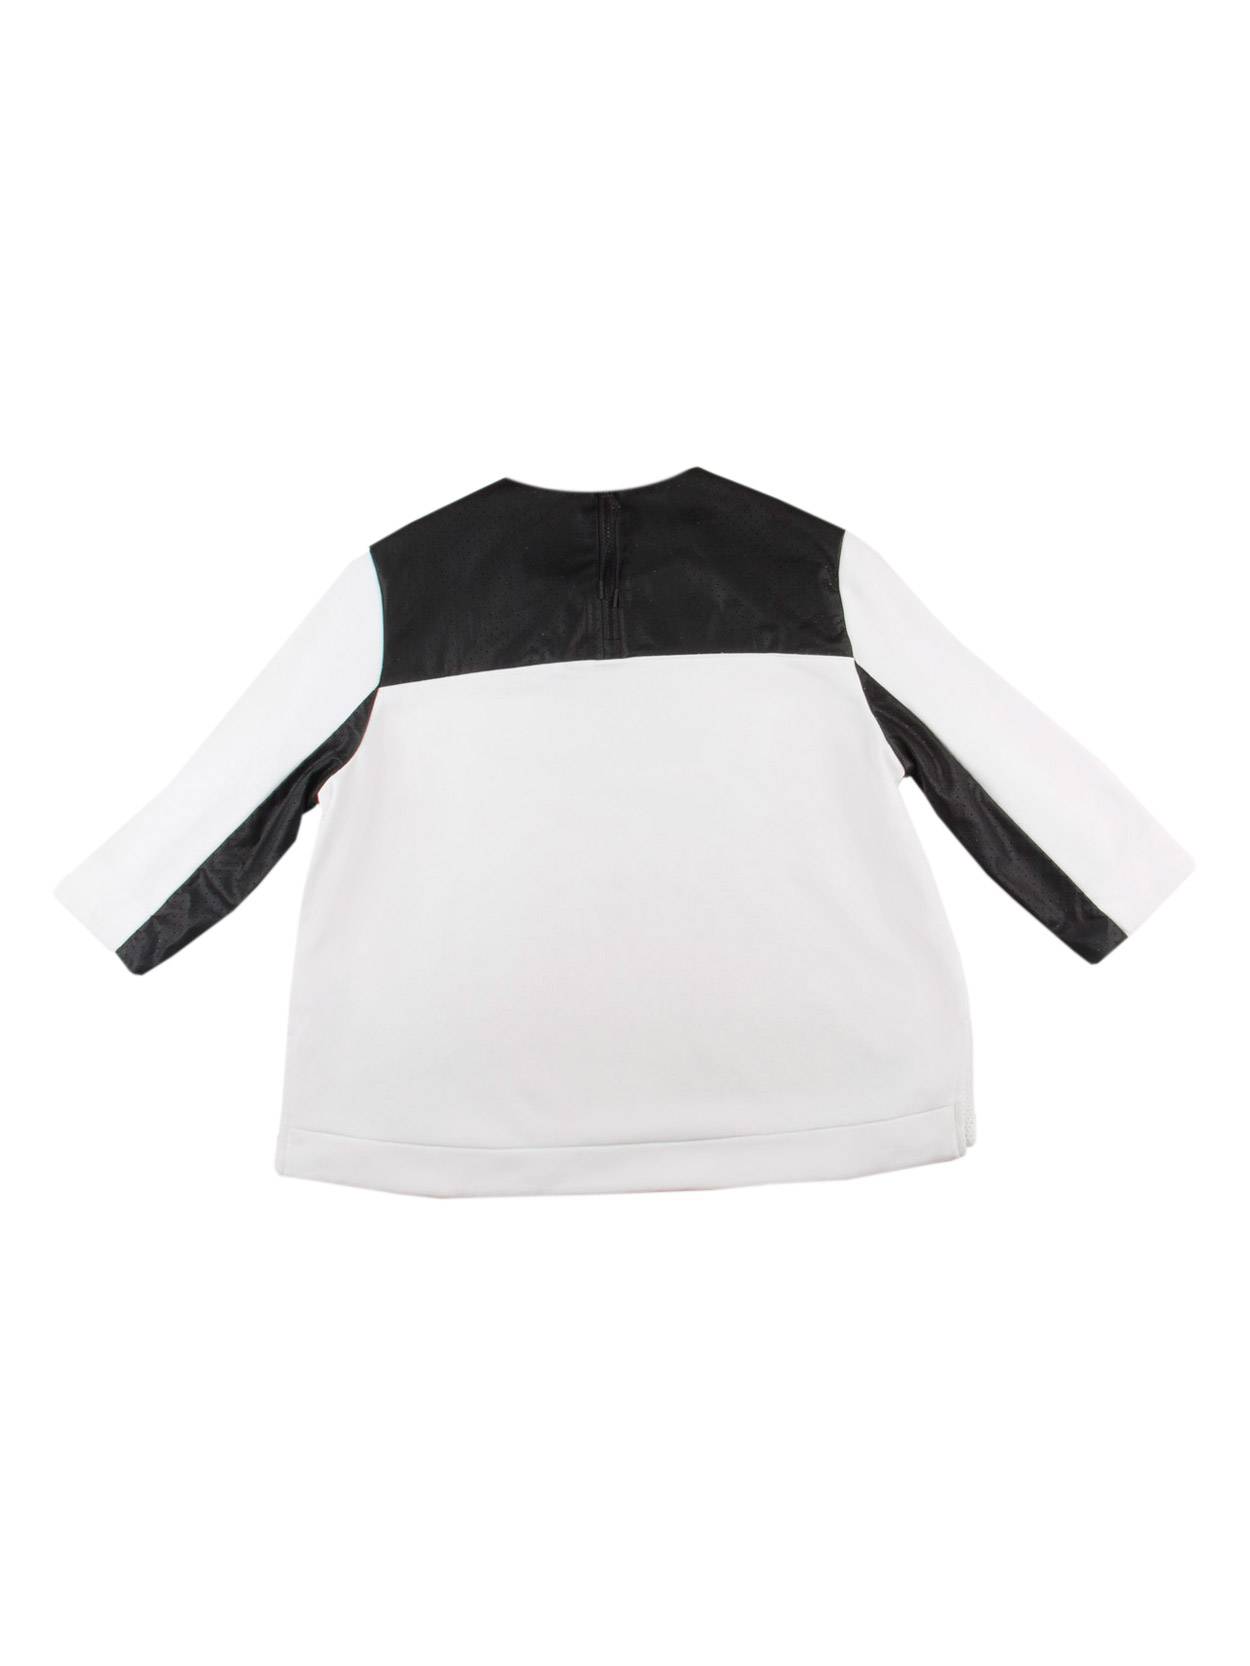 Nike Womens WMNS NSW Perforated Long Sleeve Sweatshirt White/Black Size L - image 2 of 2